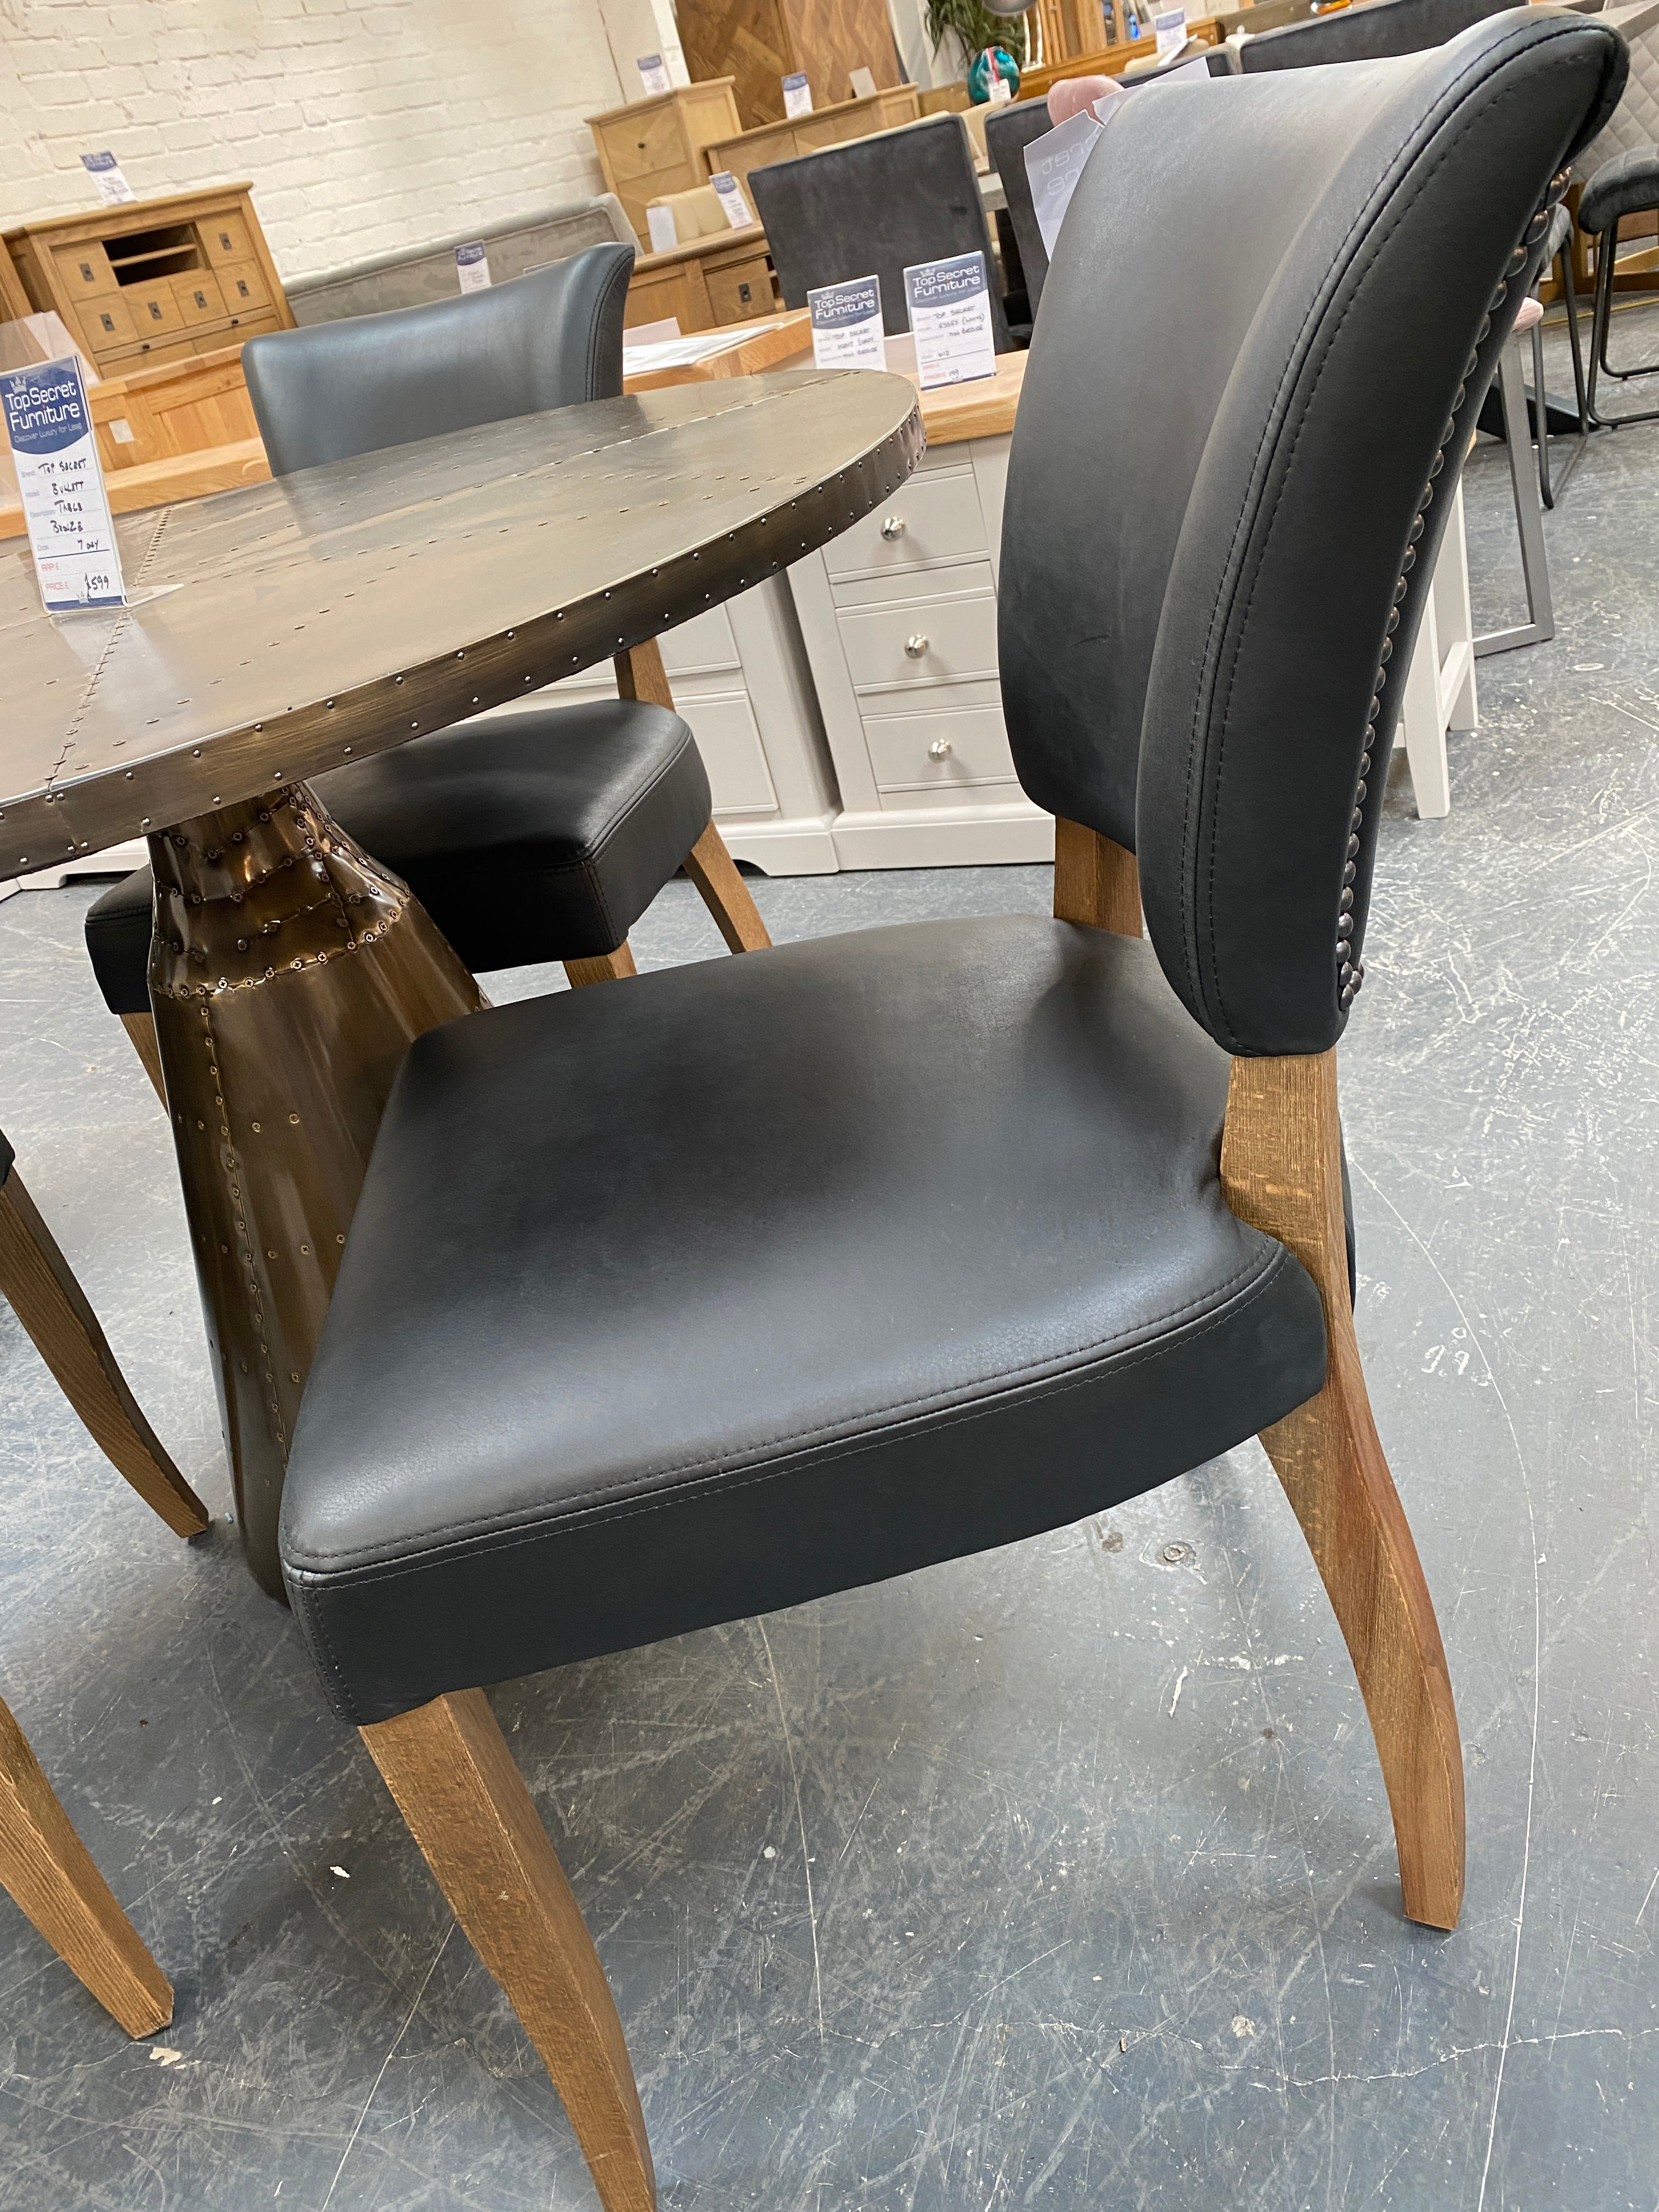 Halo Timothy Oulton Mimi Leather Dining Chairs from Top Secret Furniture